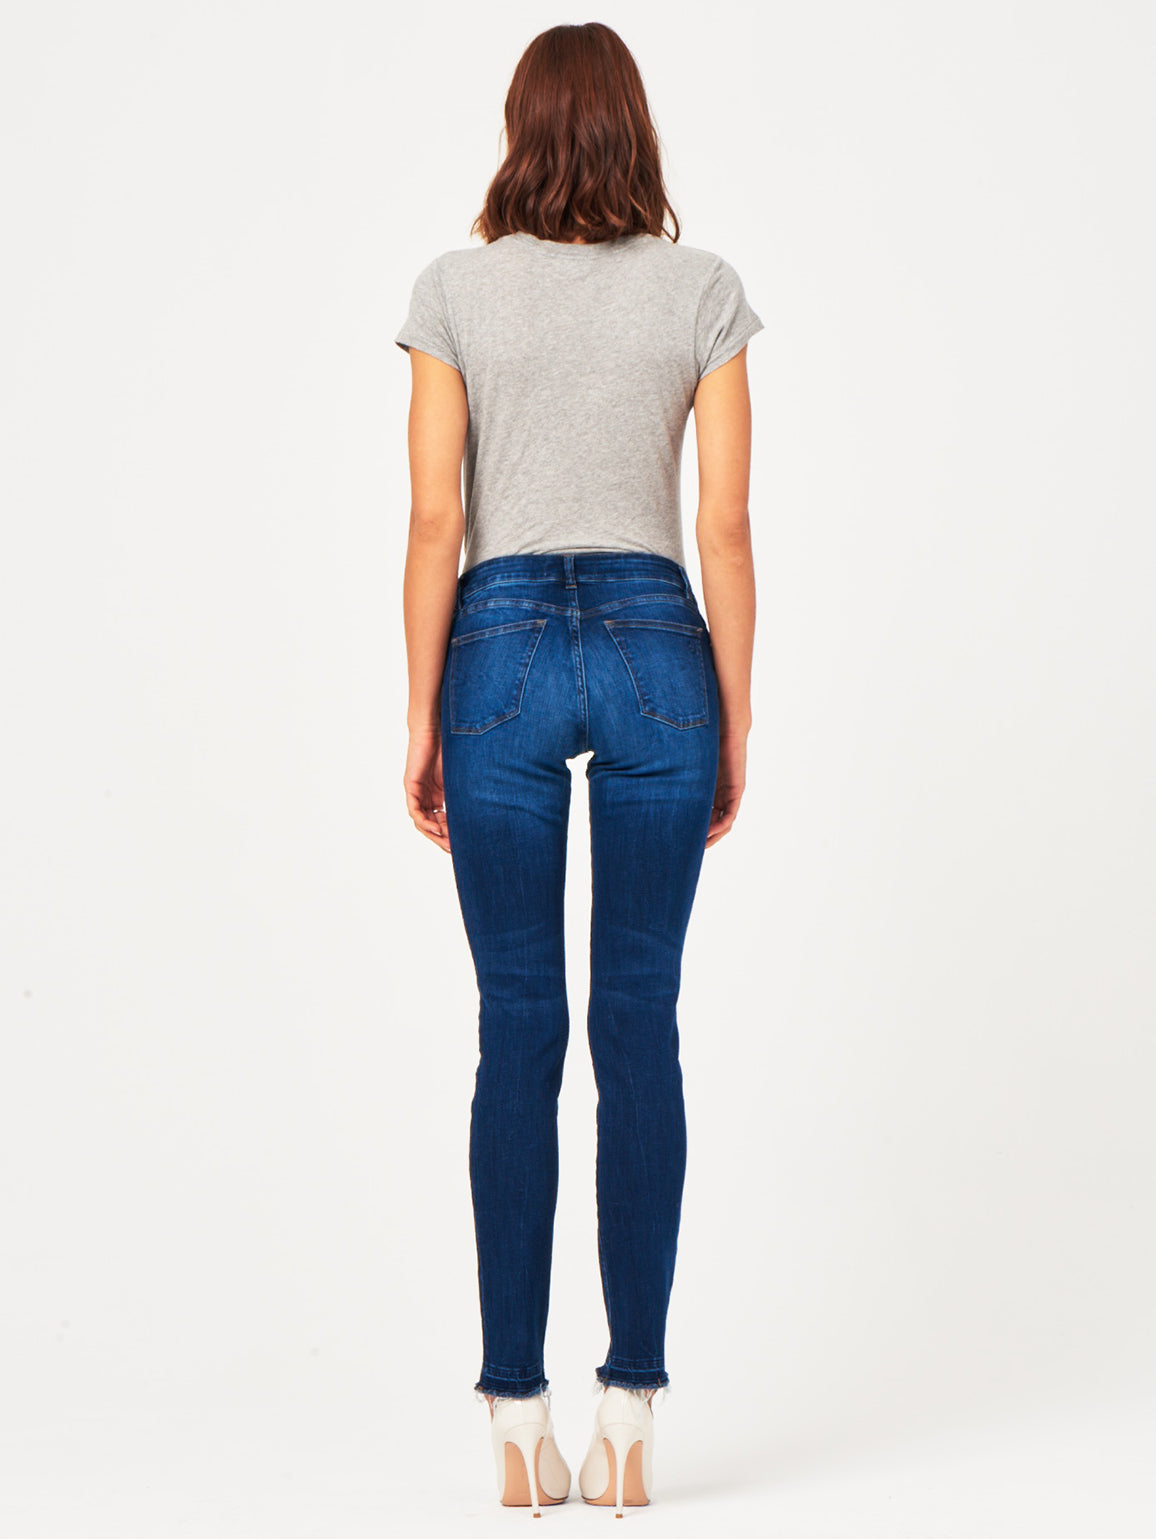 dl1961 coco curvy jeans